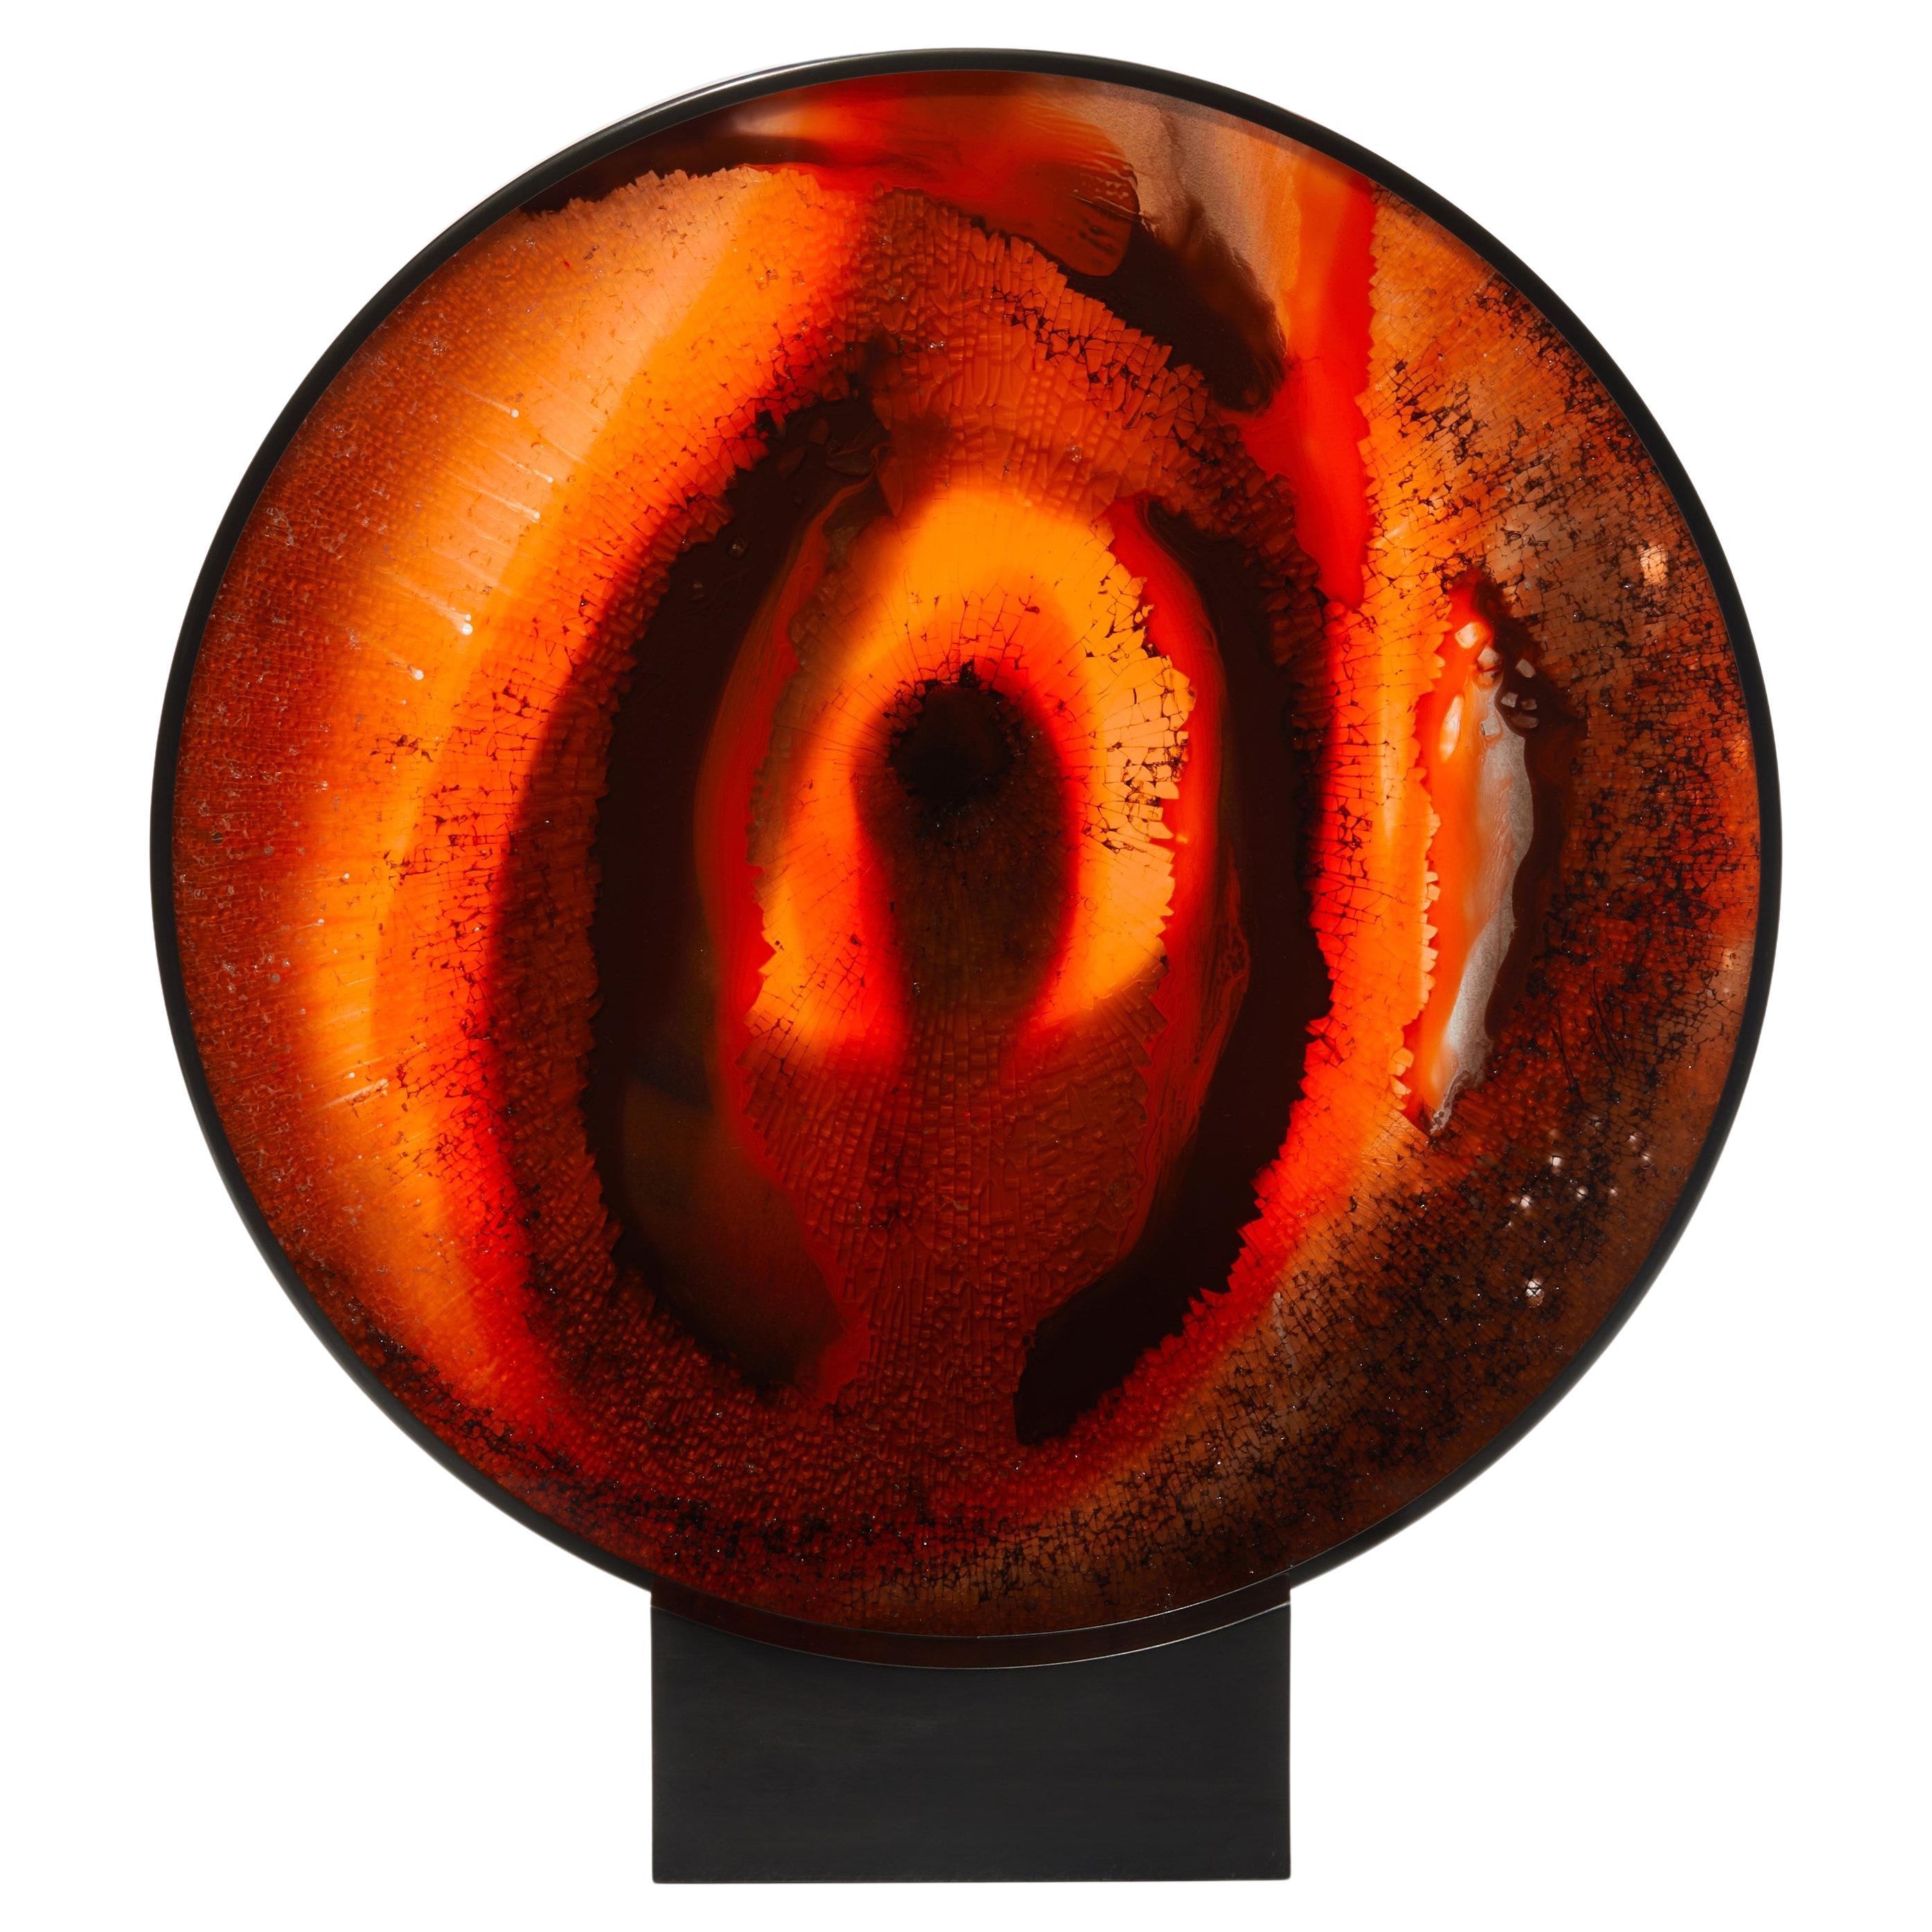 Eye of Bravery, a Red & Black Abstract Glass Artwork by Yorgos Papadopoulos